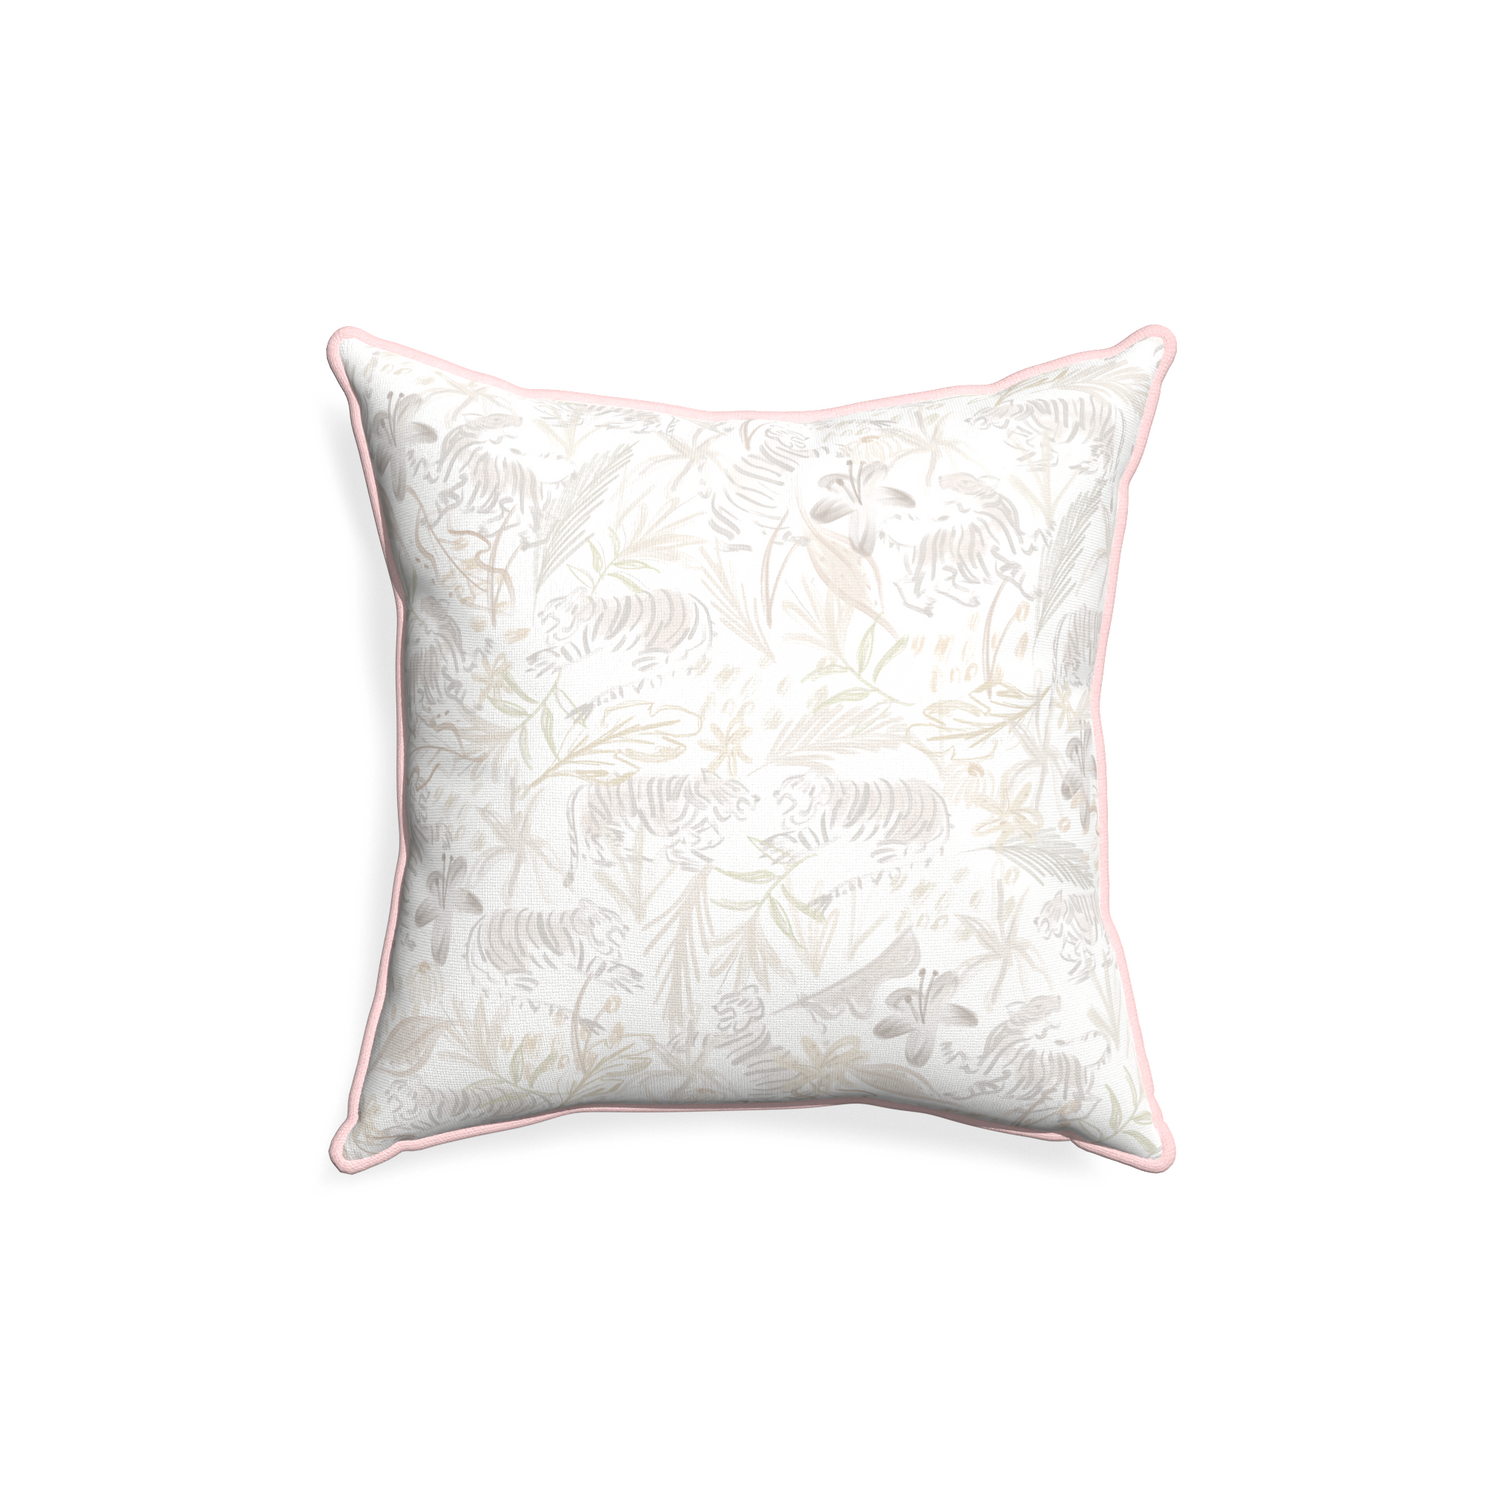 18-square frida sand custom beige chinoiserie tigerpillow with petal piping on white background